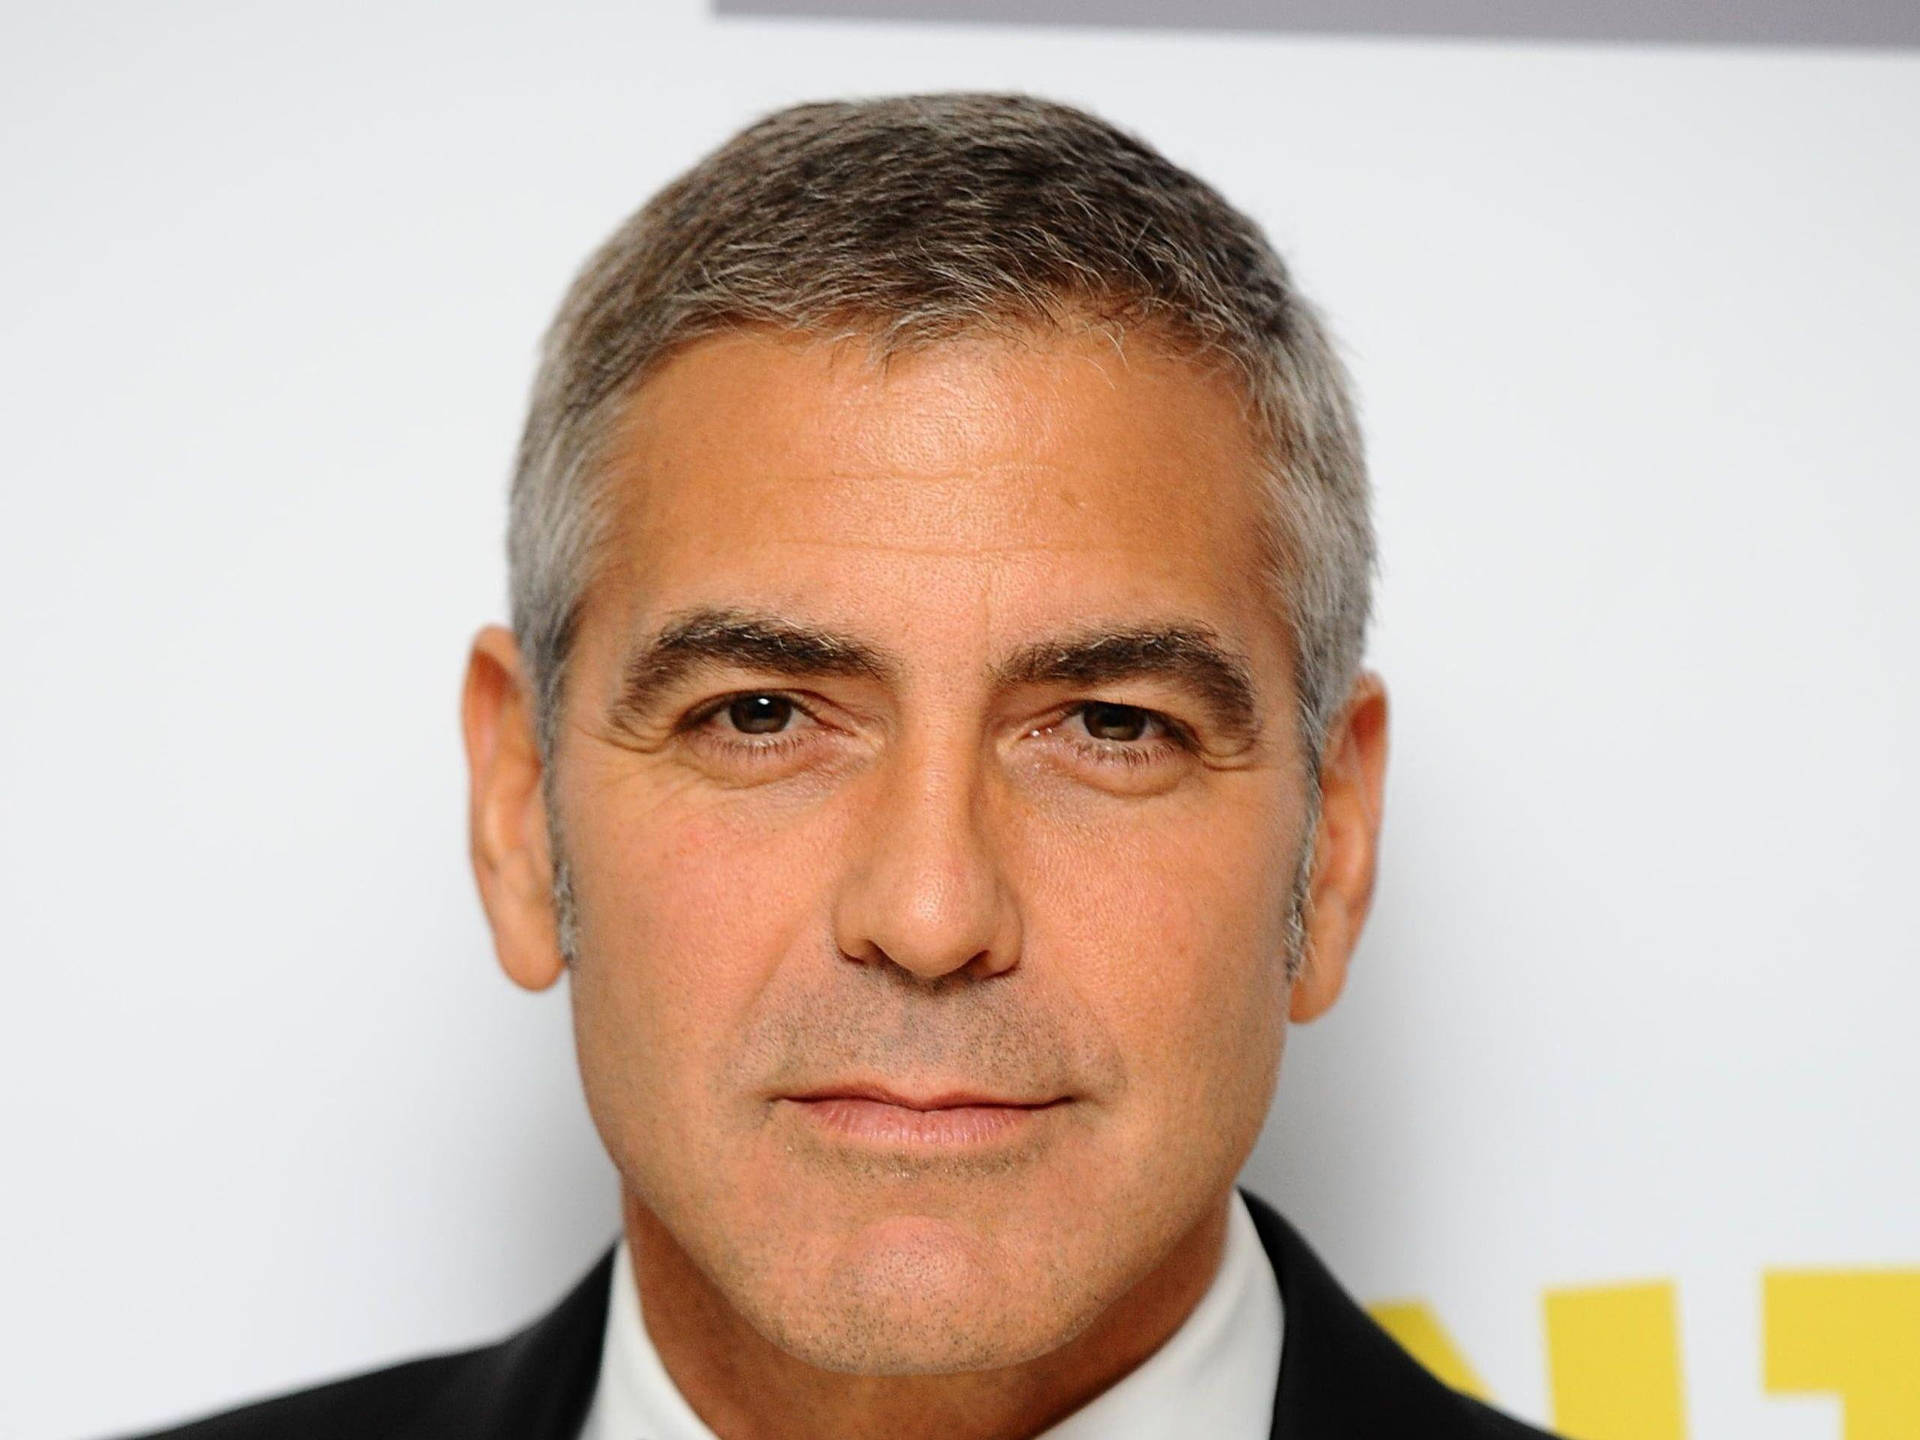 George Clooney Close-up Face Wallpaper